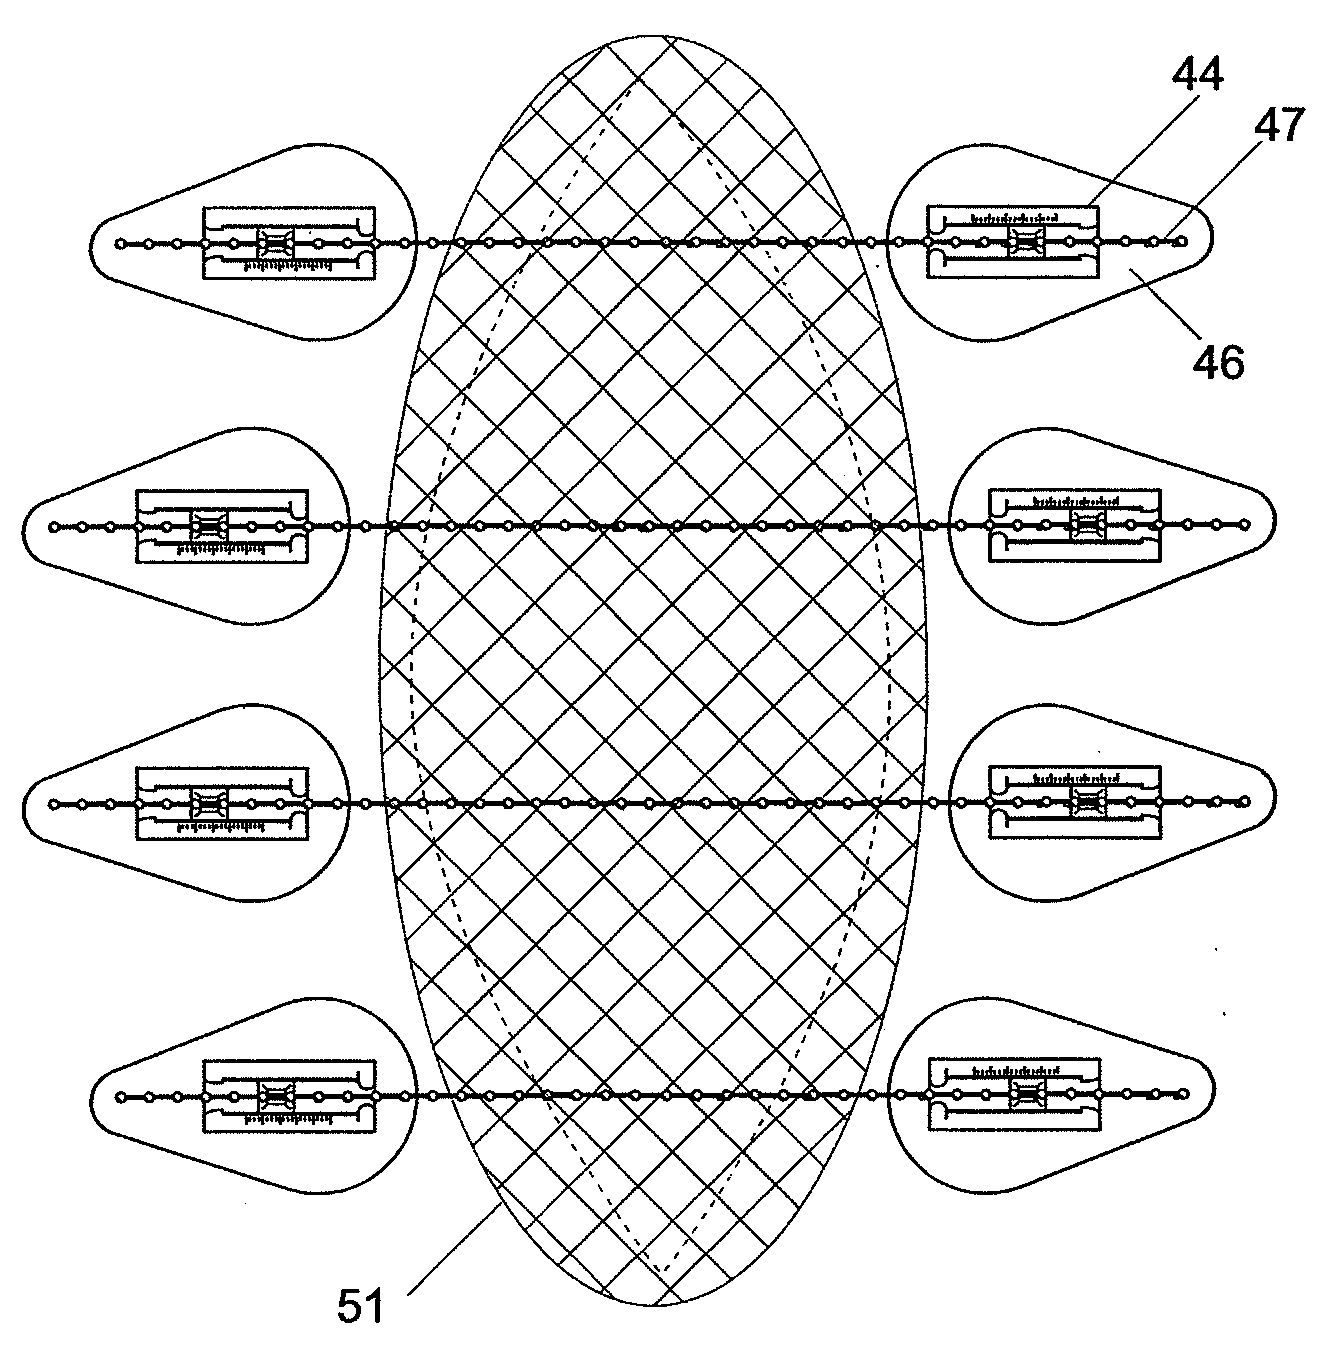 Clinical and Surgical System and Method for Moving and Stretching Plastic Tissue